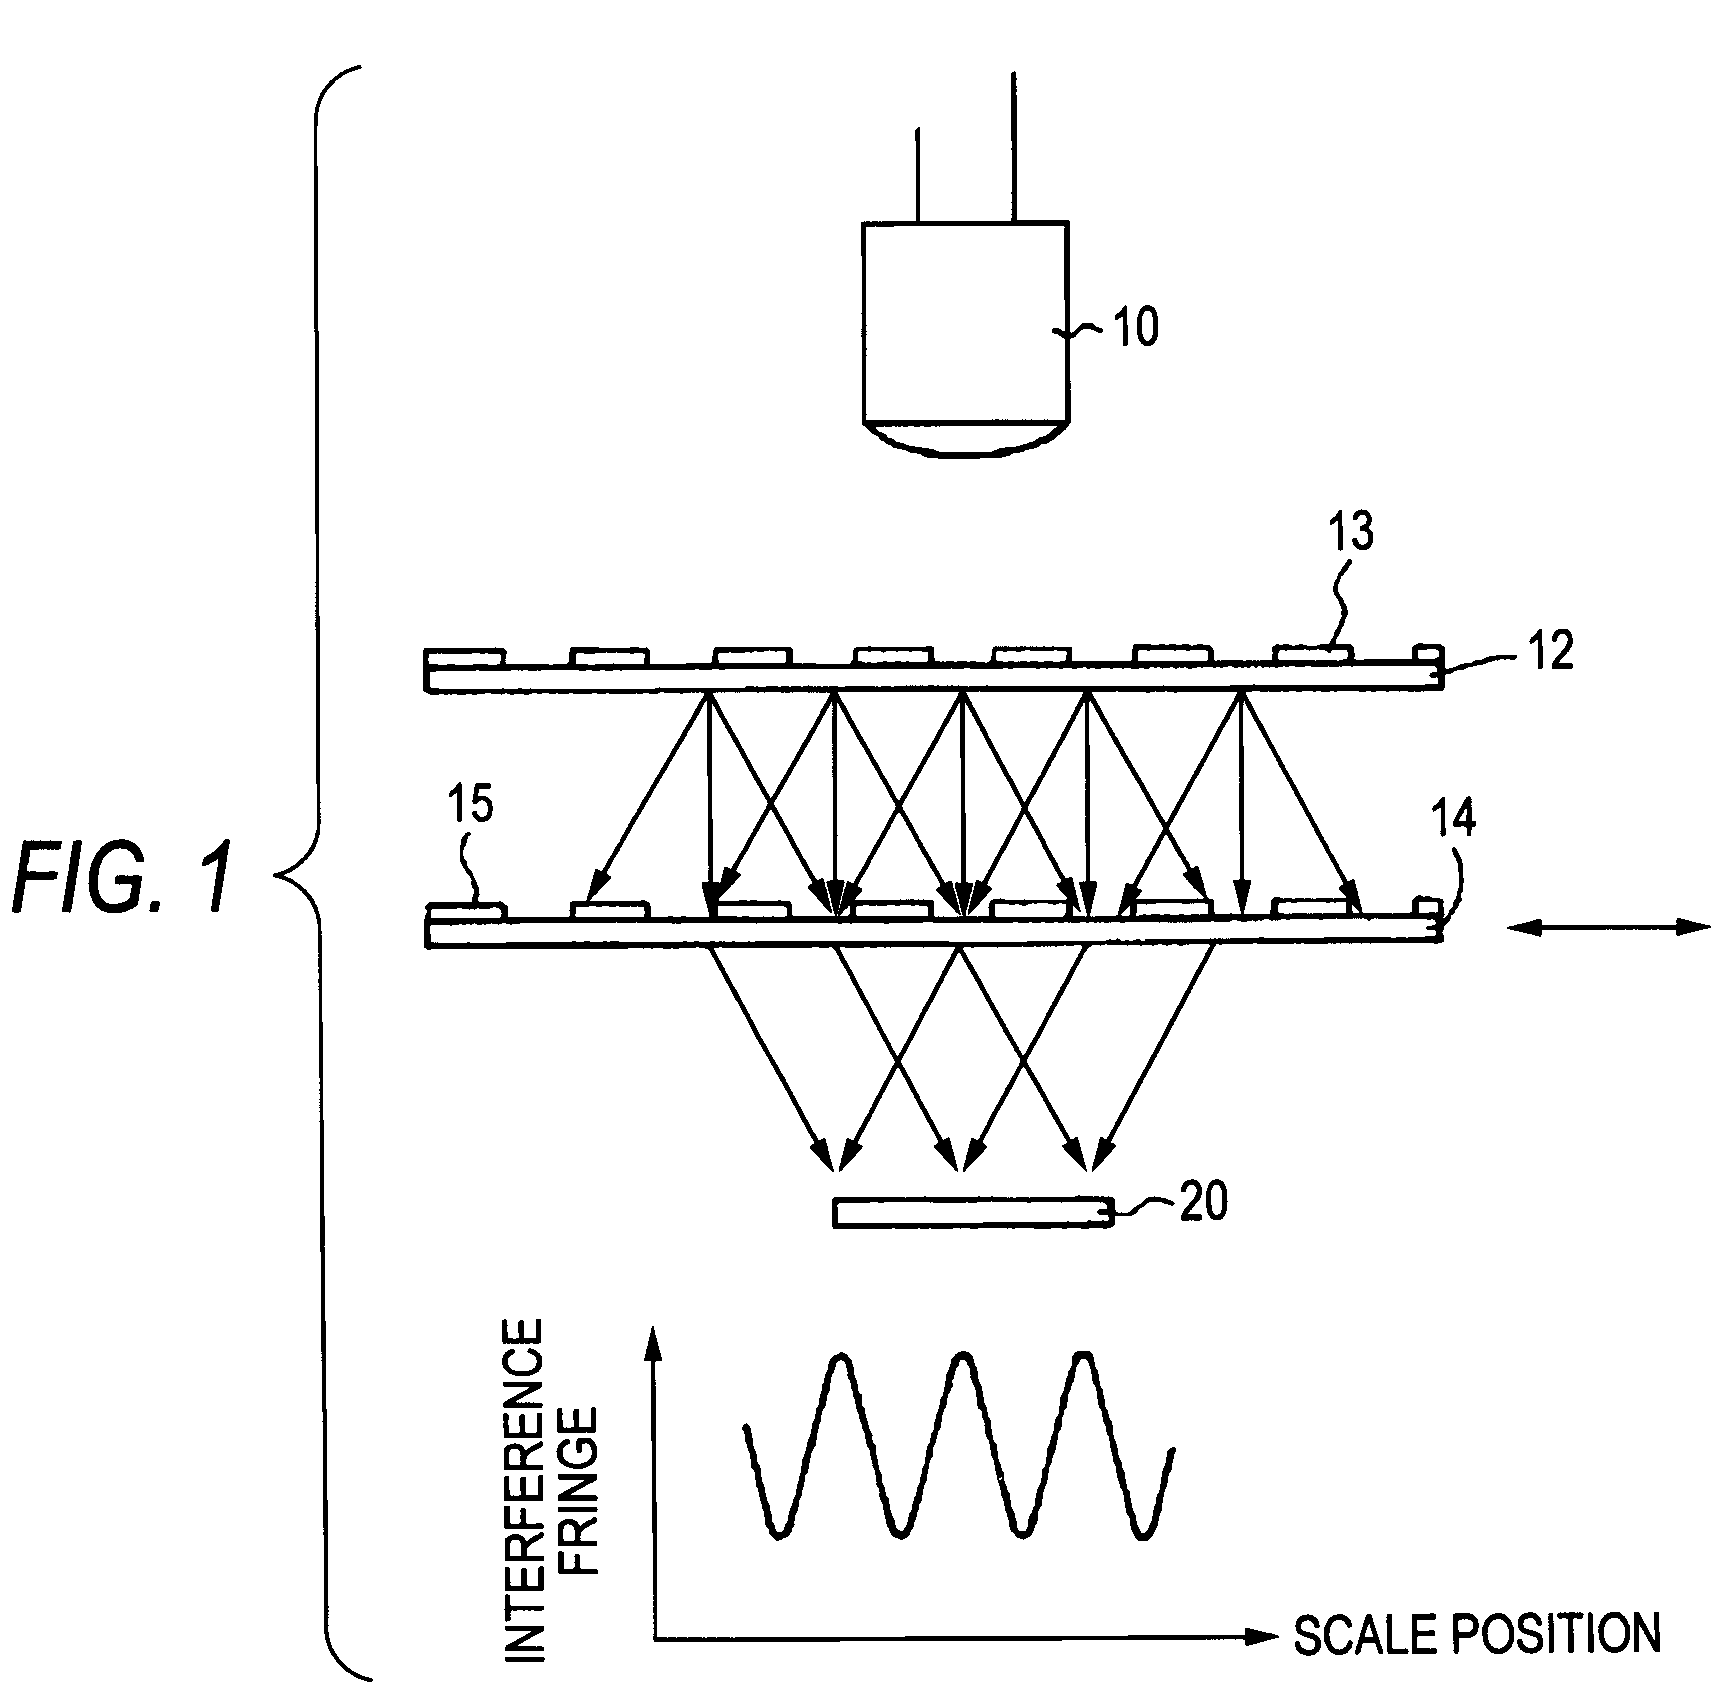 Photoelectric encoder with a transparent protective material having a thickness equal to or greater than a depth of focus of an image forming optical system disposed on the surface of a scale